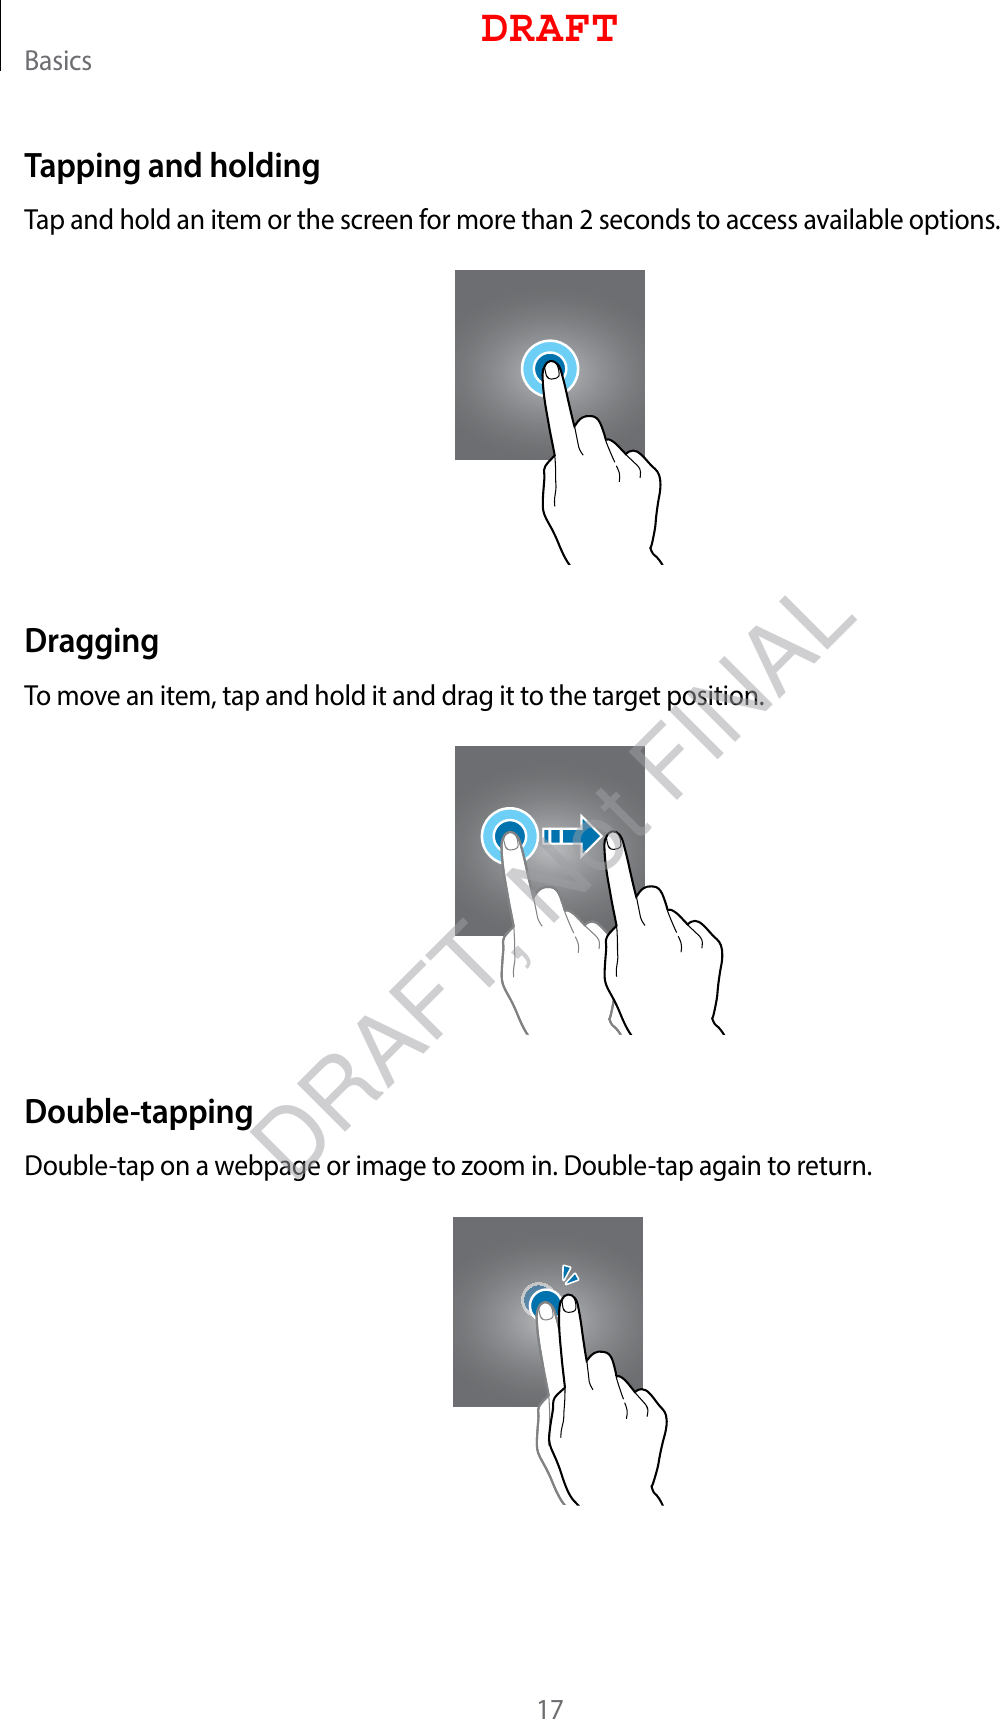 Basics17Tapping and holdingTap and hold an item or the screen for more than 2 seconds to access available options.DraggingTo move an item, tap and hold it and drag it to the target position.Double-tappingDouble-tap on a webpage or image to zoom in. Double-tap again to return.DRAFTDRAFT, Not FINAL